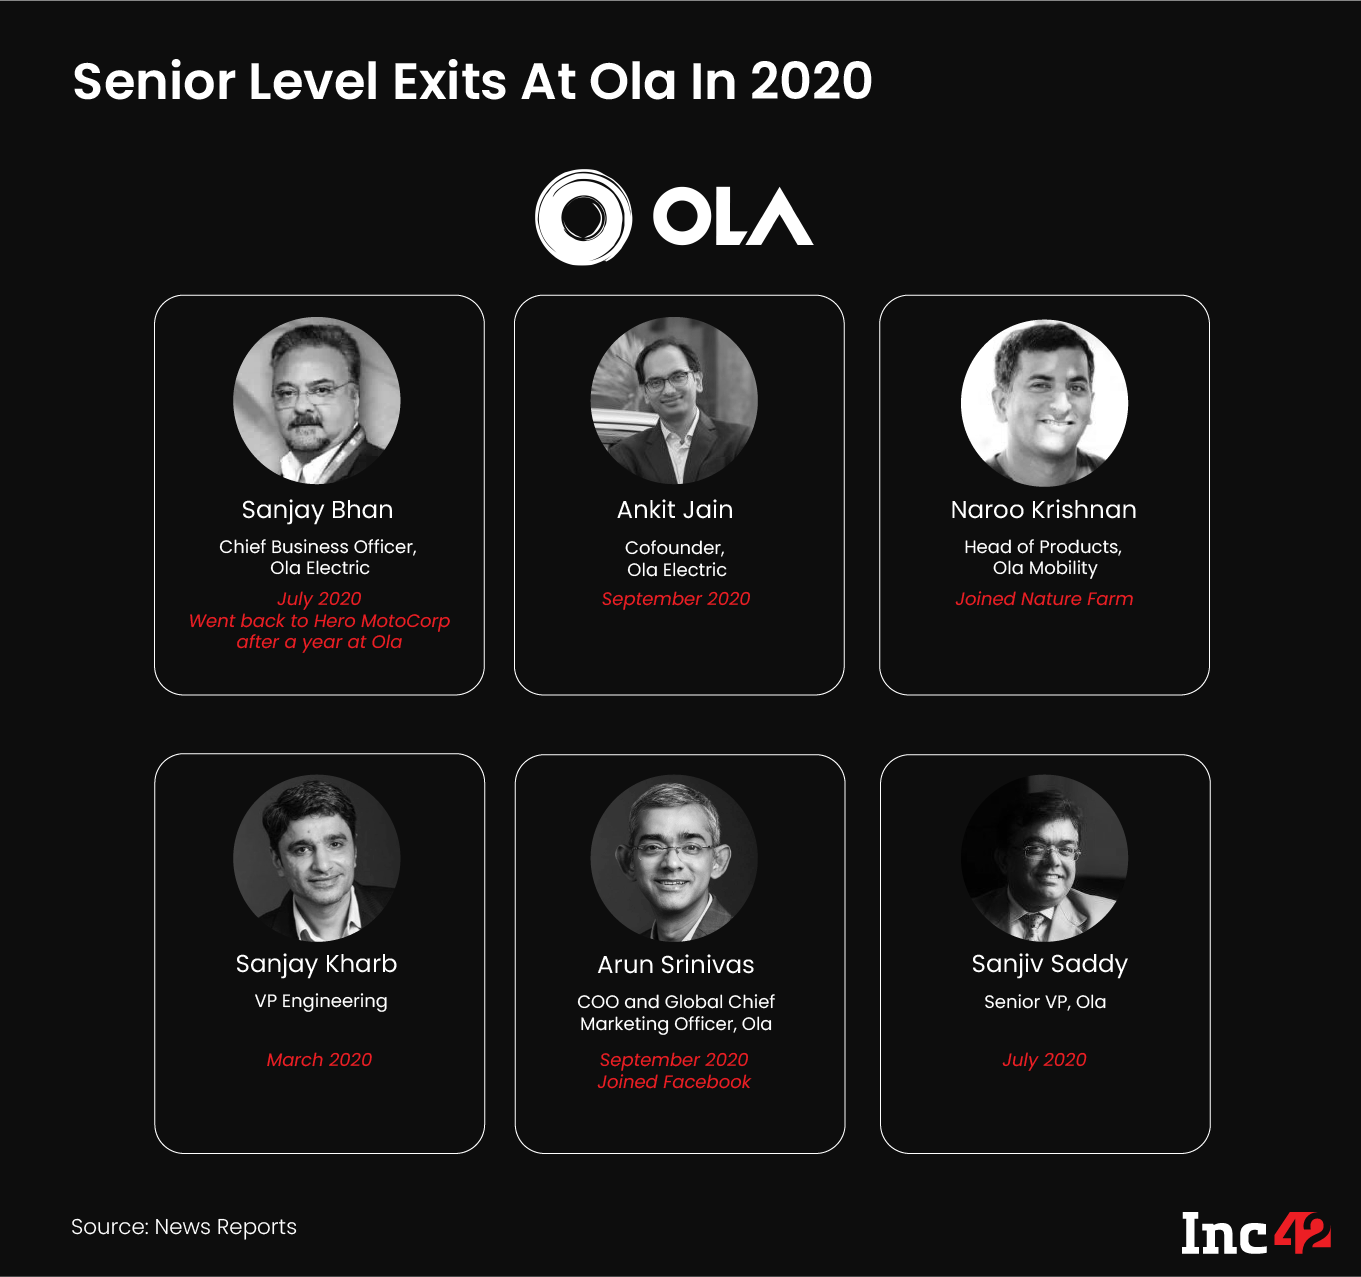 High Profile Exits at Ola in 2020